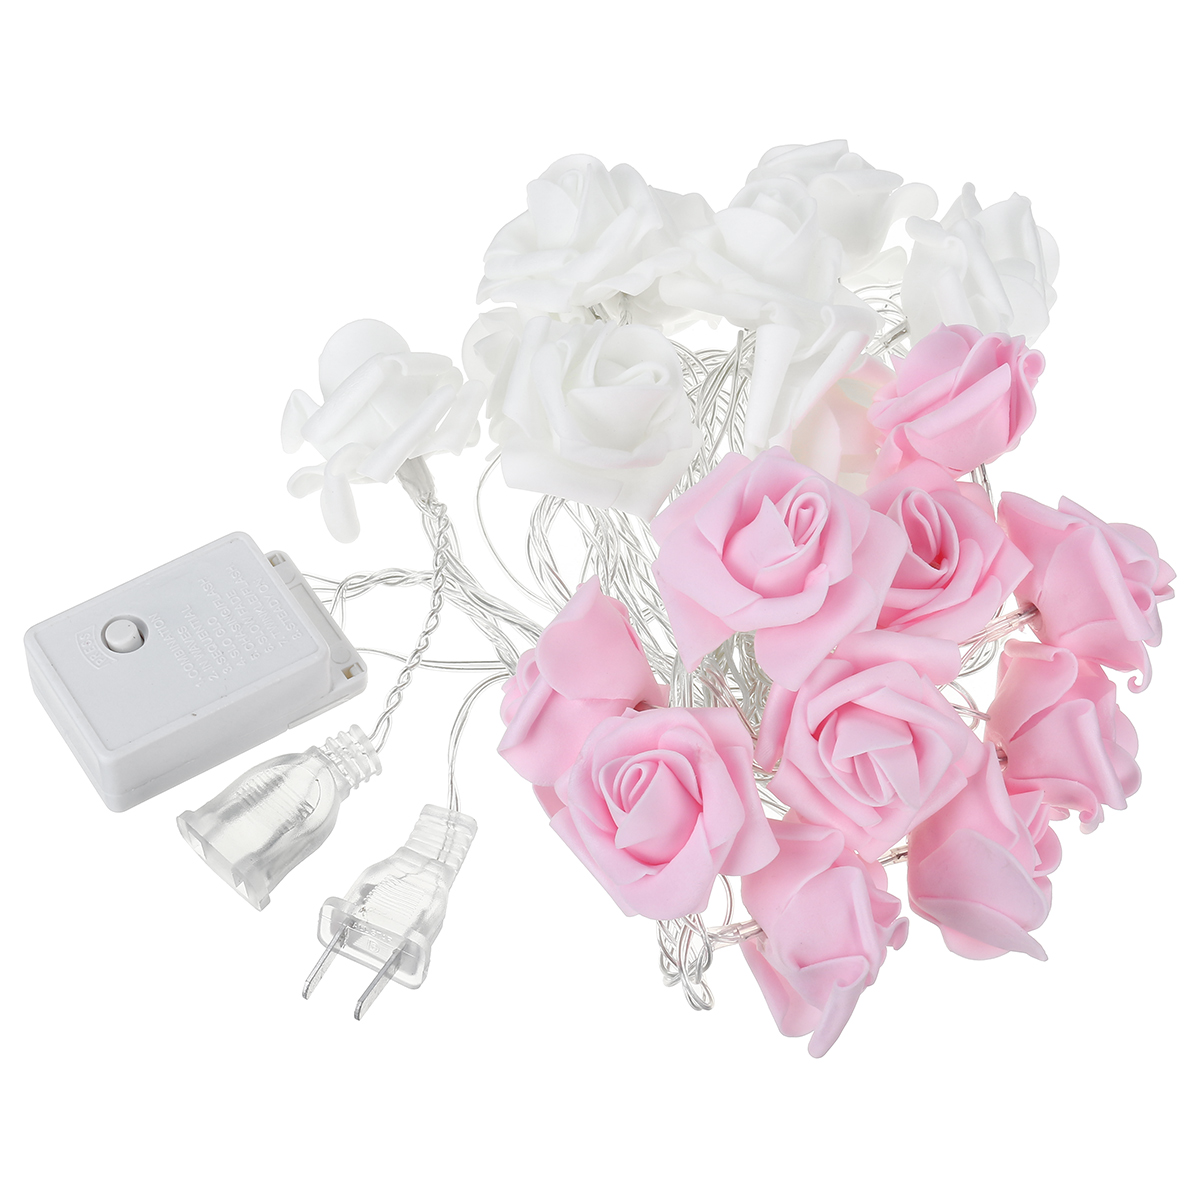 3M-6M-LED-Artificia-Rose-Flower-Fairy-String-Light-Home-Party-Wedding-Holiday-Christmas-Decor-Lamp-A-1715953-6